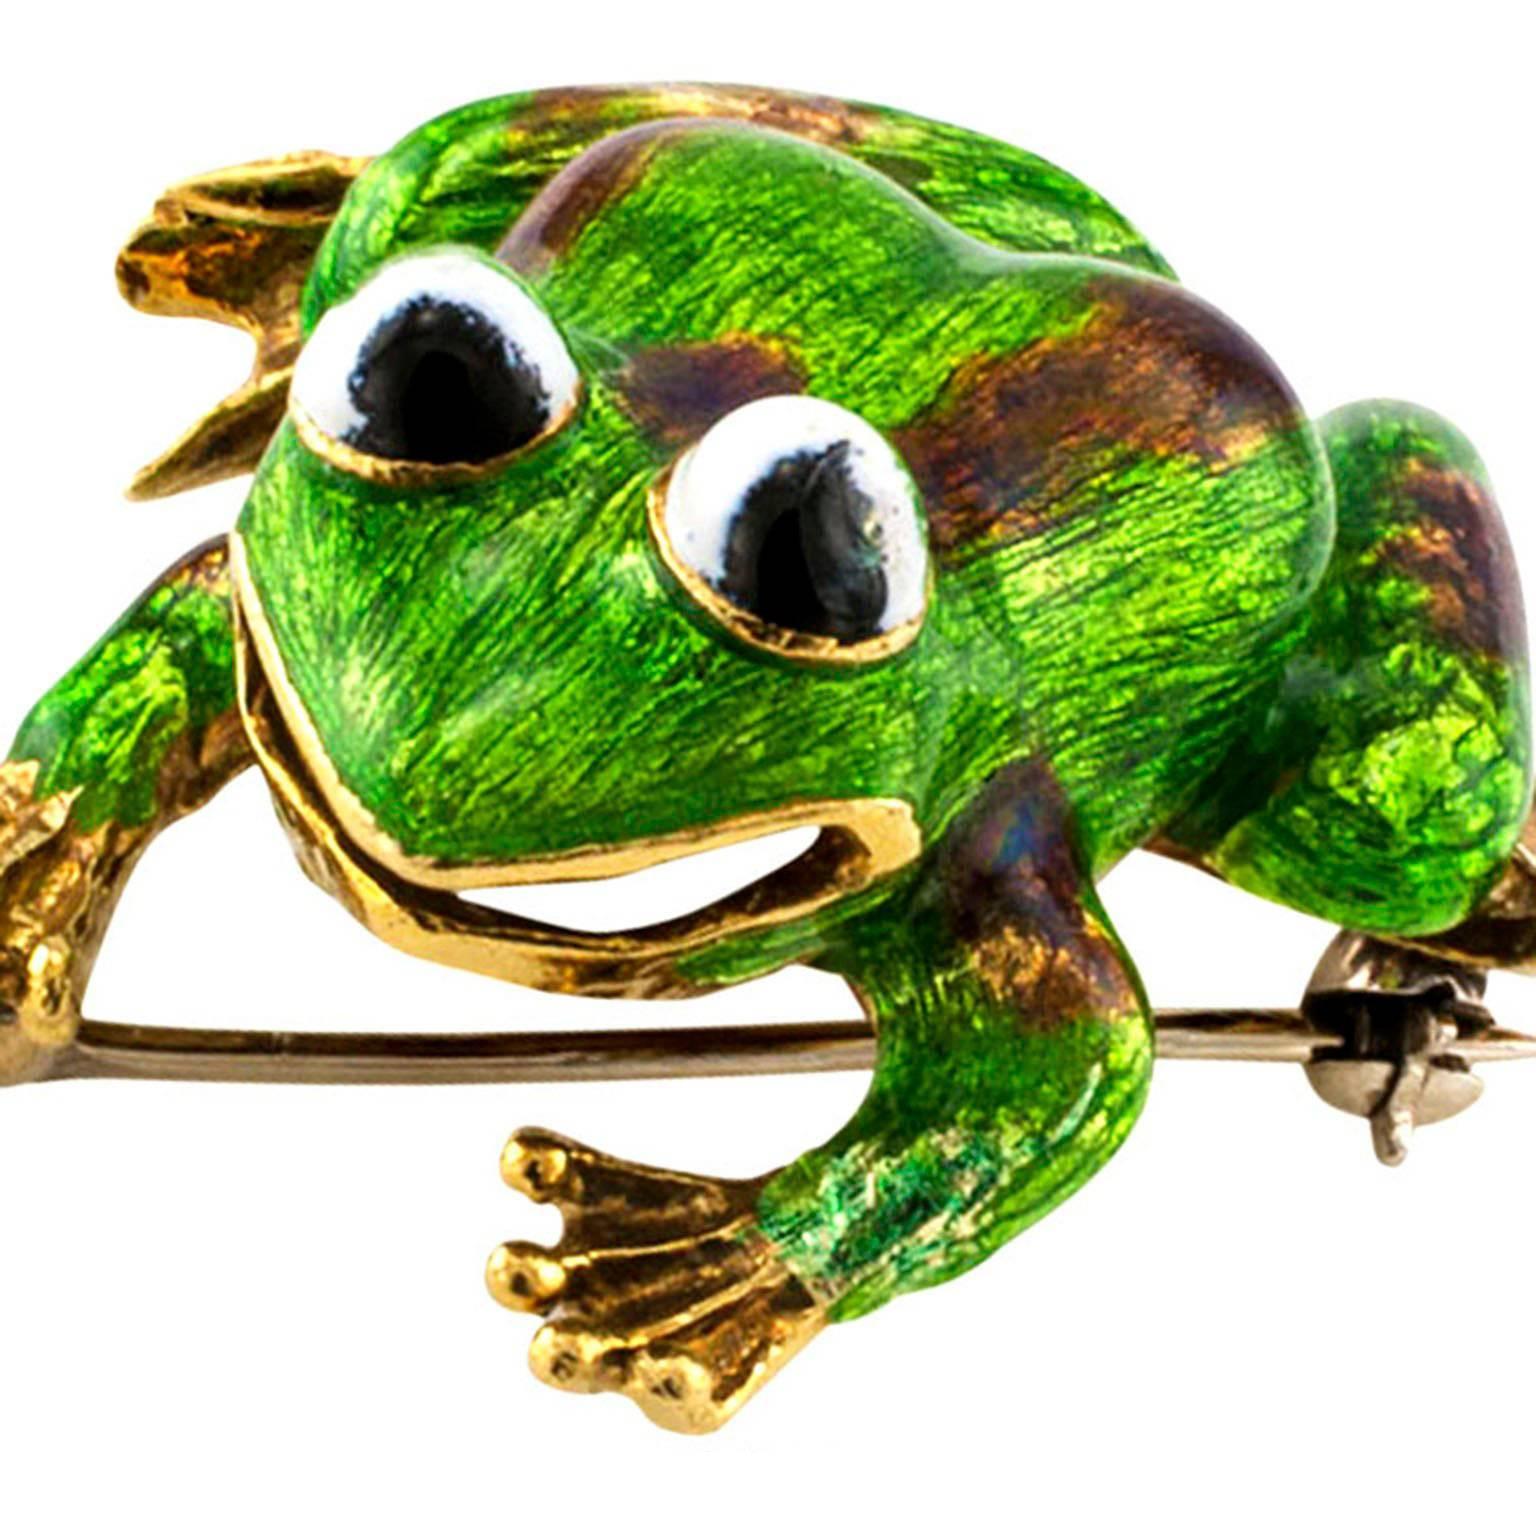 Estate Green Enamel Frog Brooch by Martine Circa 1960

Guilty pleasures, like having solid 18 karat gold pets, refusing to be friends with none but the most civilized of frogs... la dolce vita.  Clad in translucent bright green enamel accented with